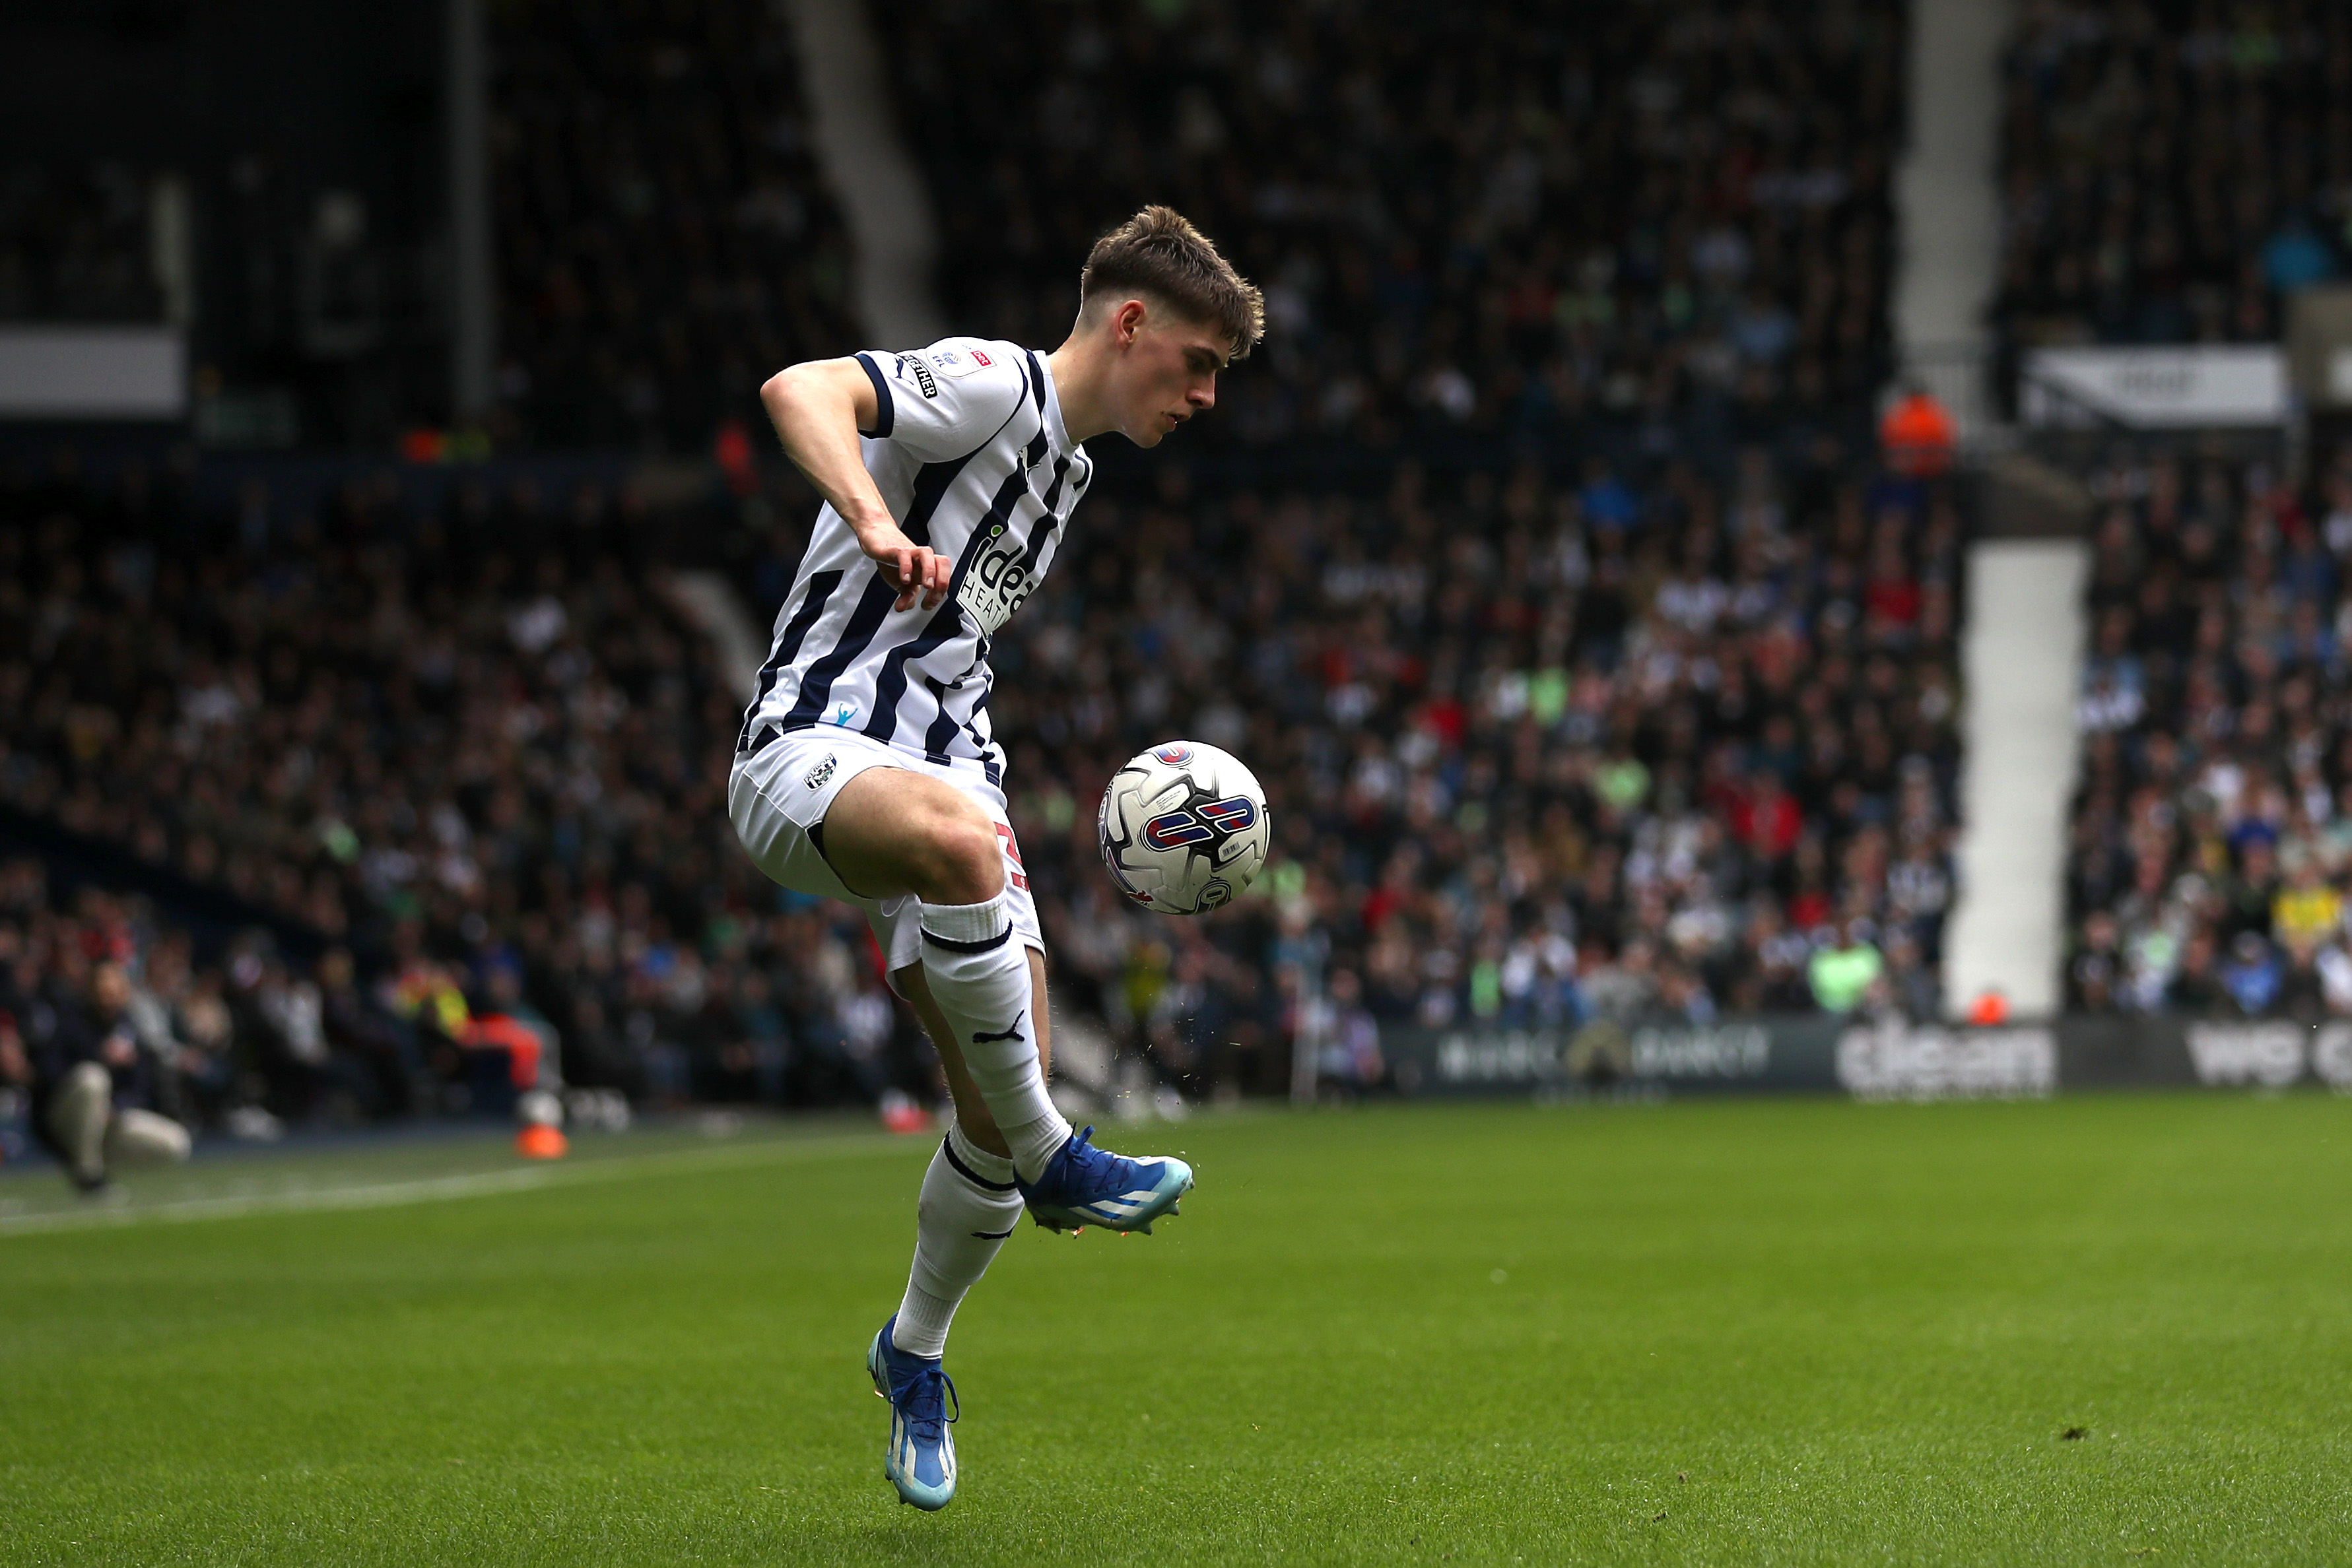 Tom Fellows controlling the ball at The Hawthorns wearing a home Albion kit 